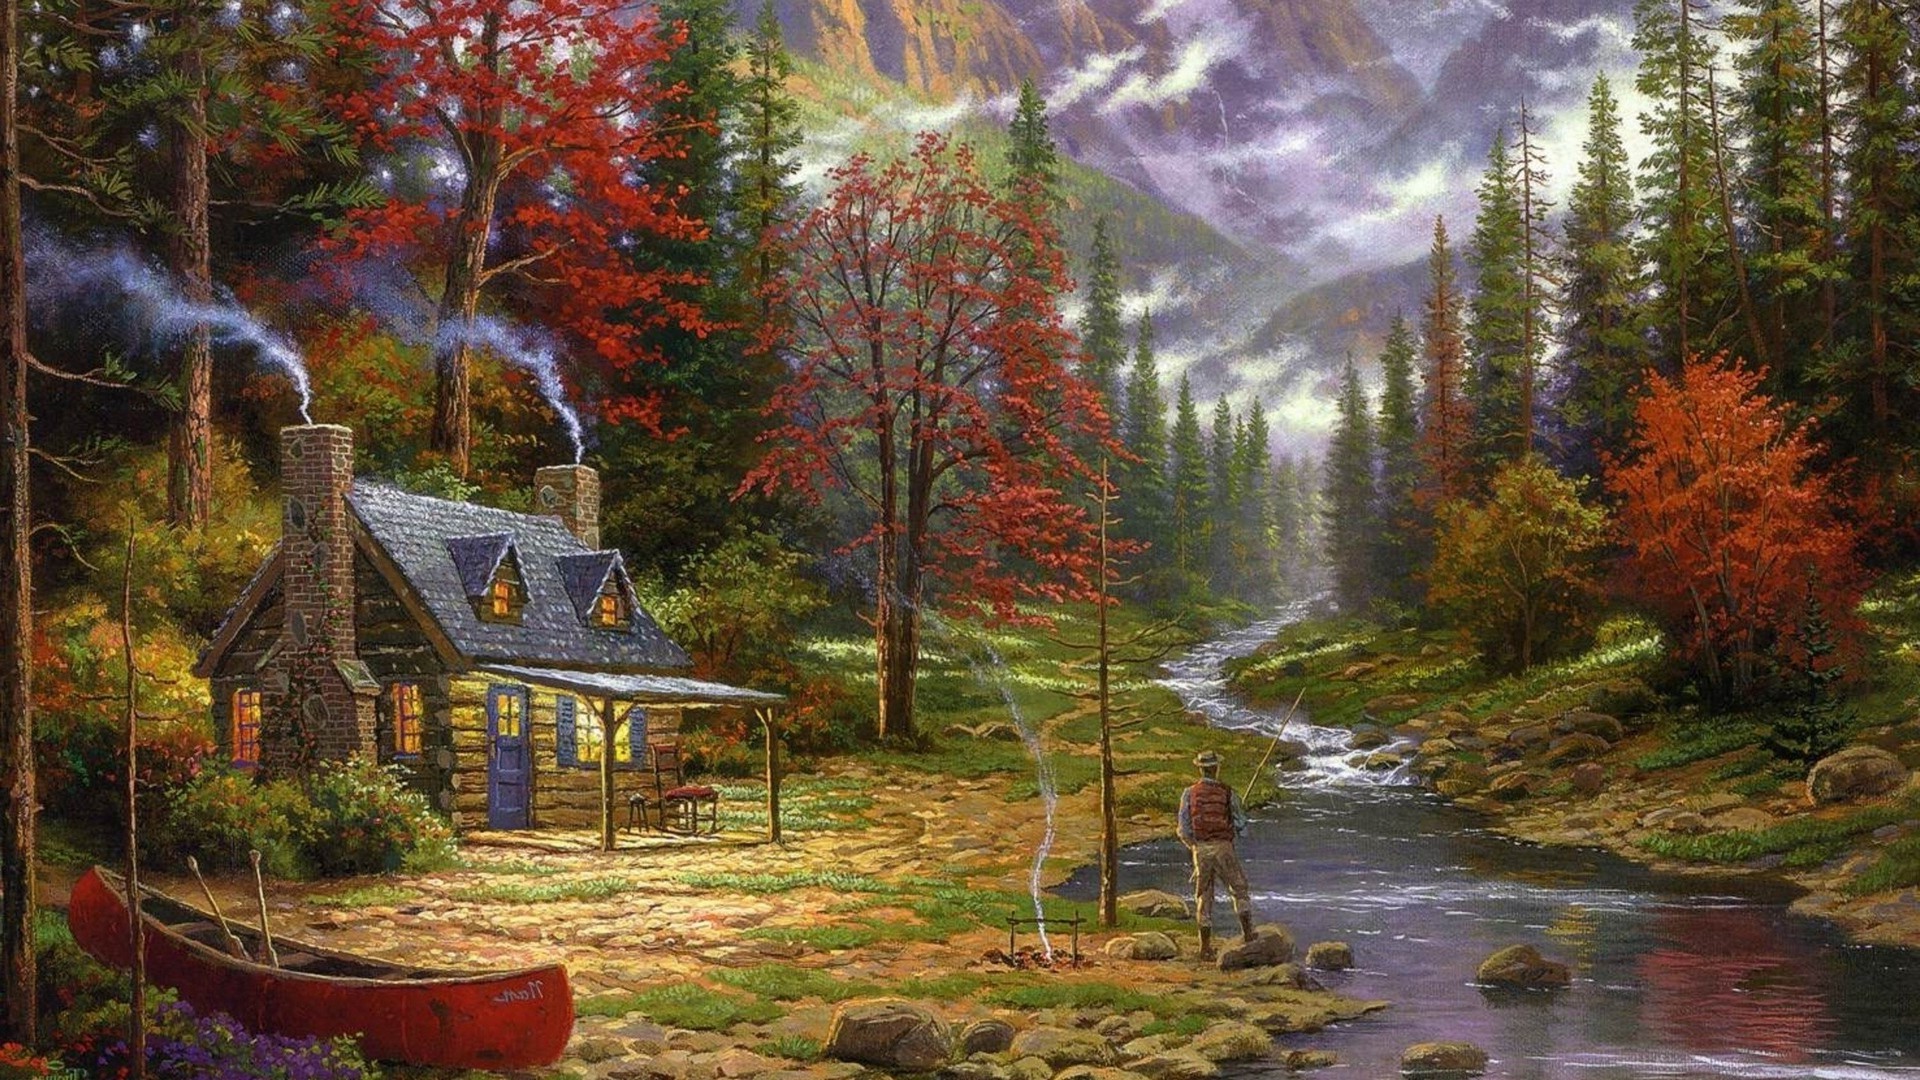 Painting Cottage Canoes River Fishing Forest Chimneys Thomas Kinkade Wallpapers Hd